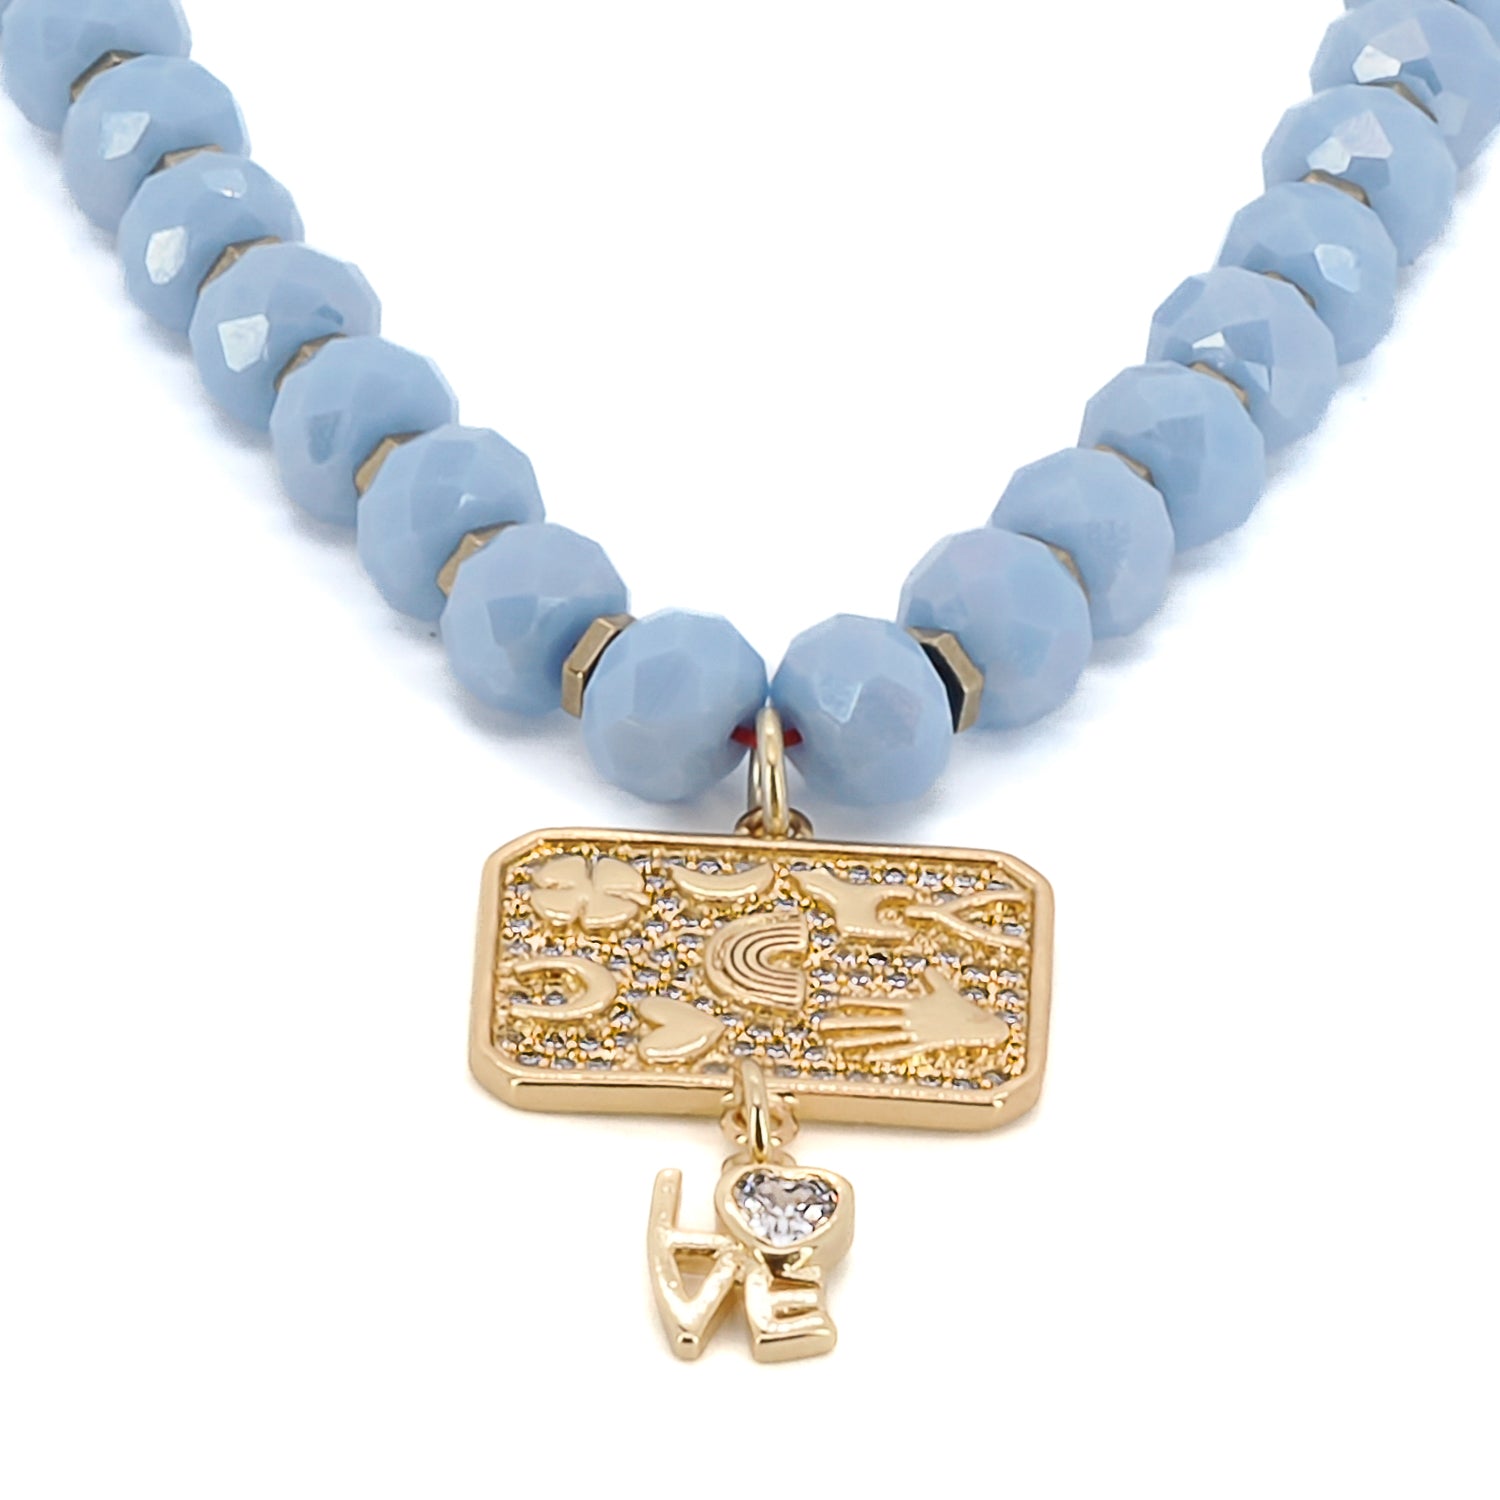 A powerful talisman that can offer protection, good fortune, and love to the wearer.